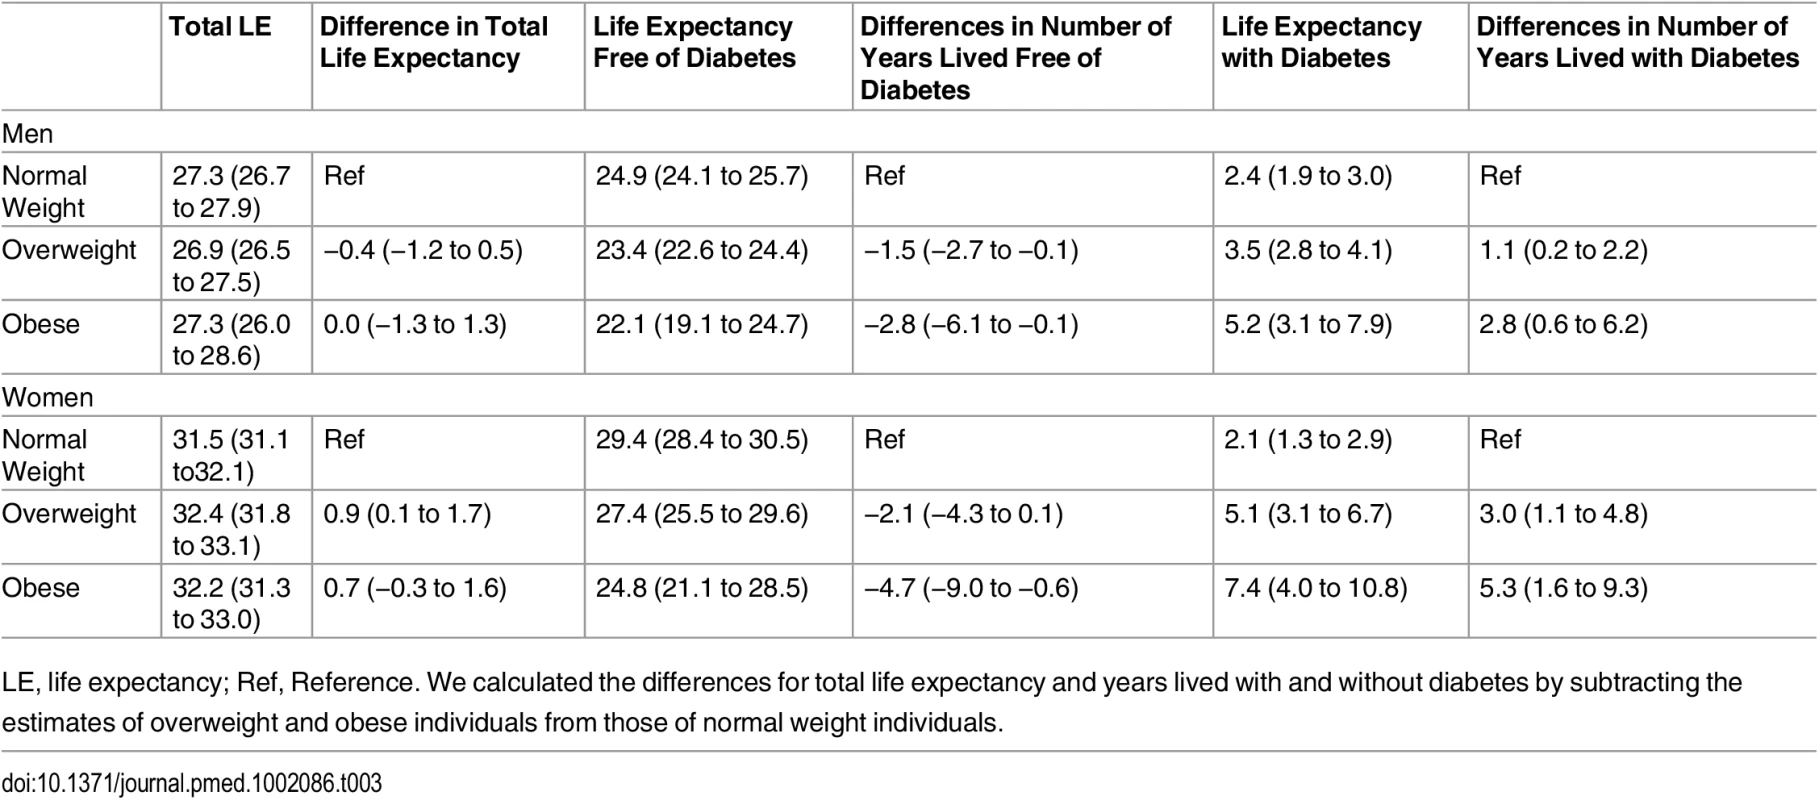 Differences in life expectancy, in years, at age 55 y for normal weight, overweight, and obesity in men and women.